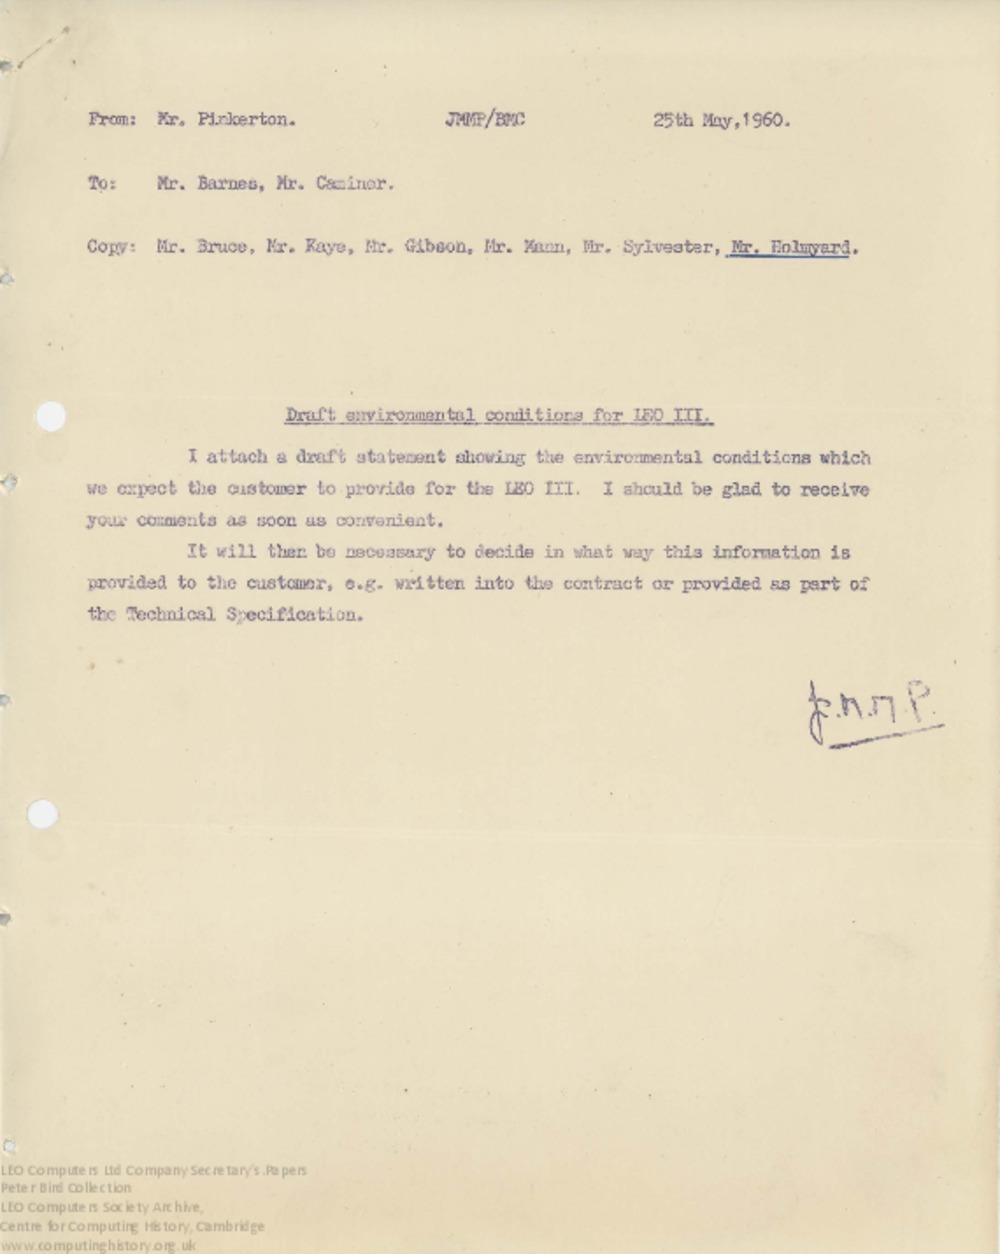 Article: 62844 Draft Recommended Environmental Conditions for LEO III, 25th May 1960